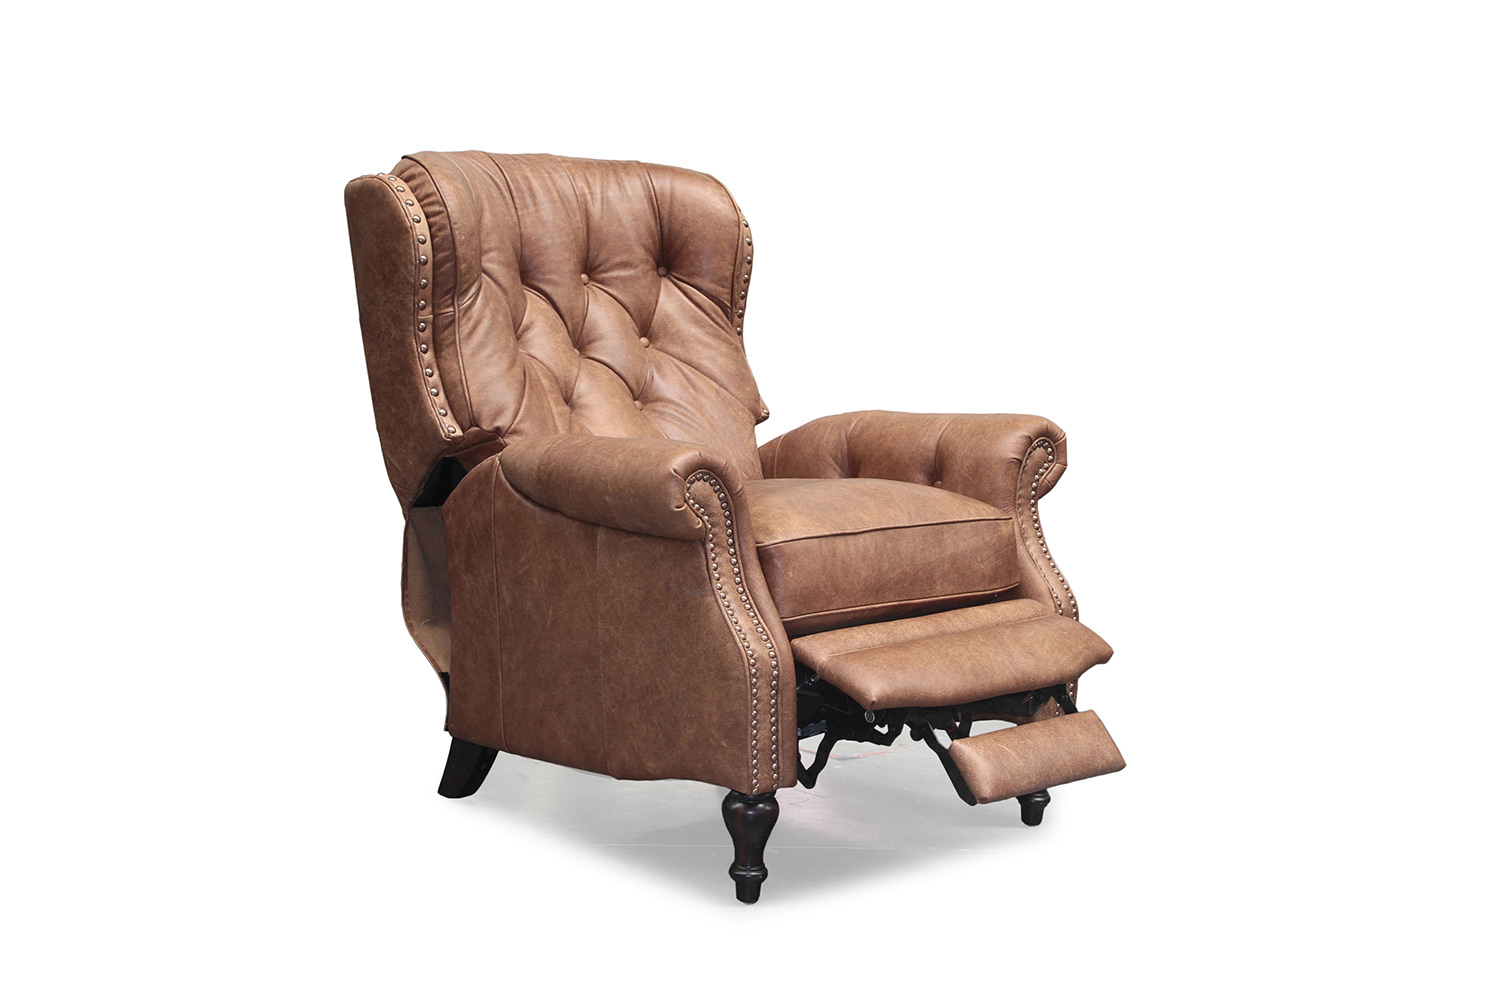 Barcalounger KendAll Recliner Chair - Sanded Bomber/All top grain Leather